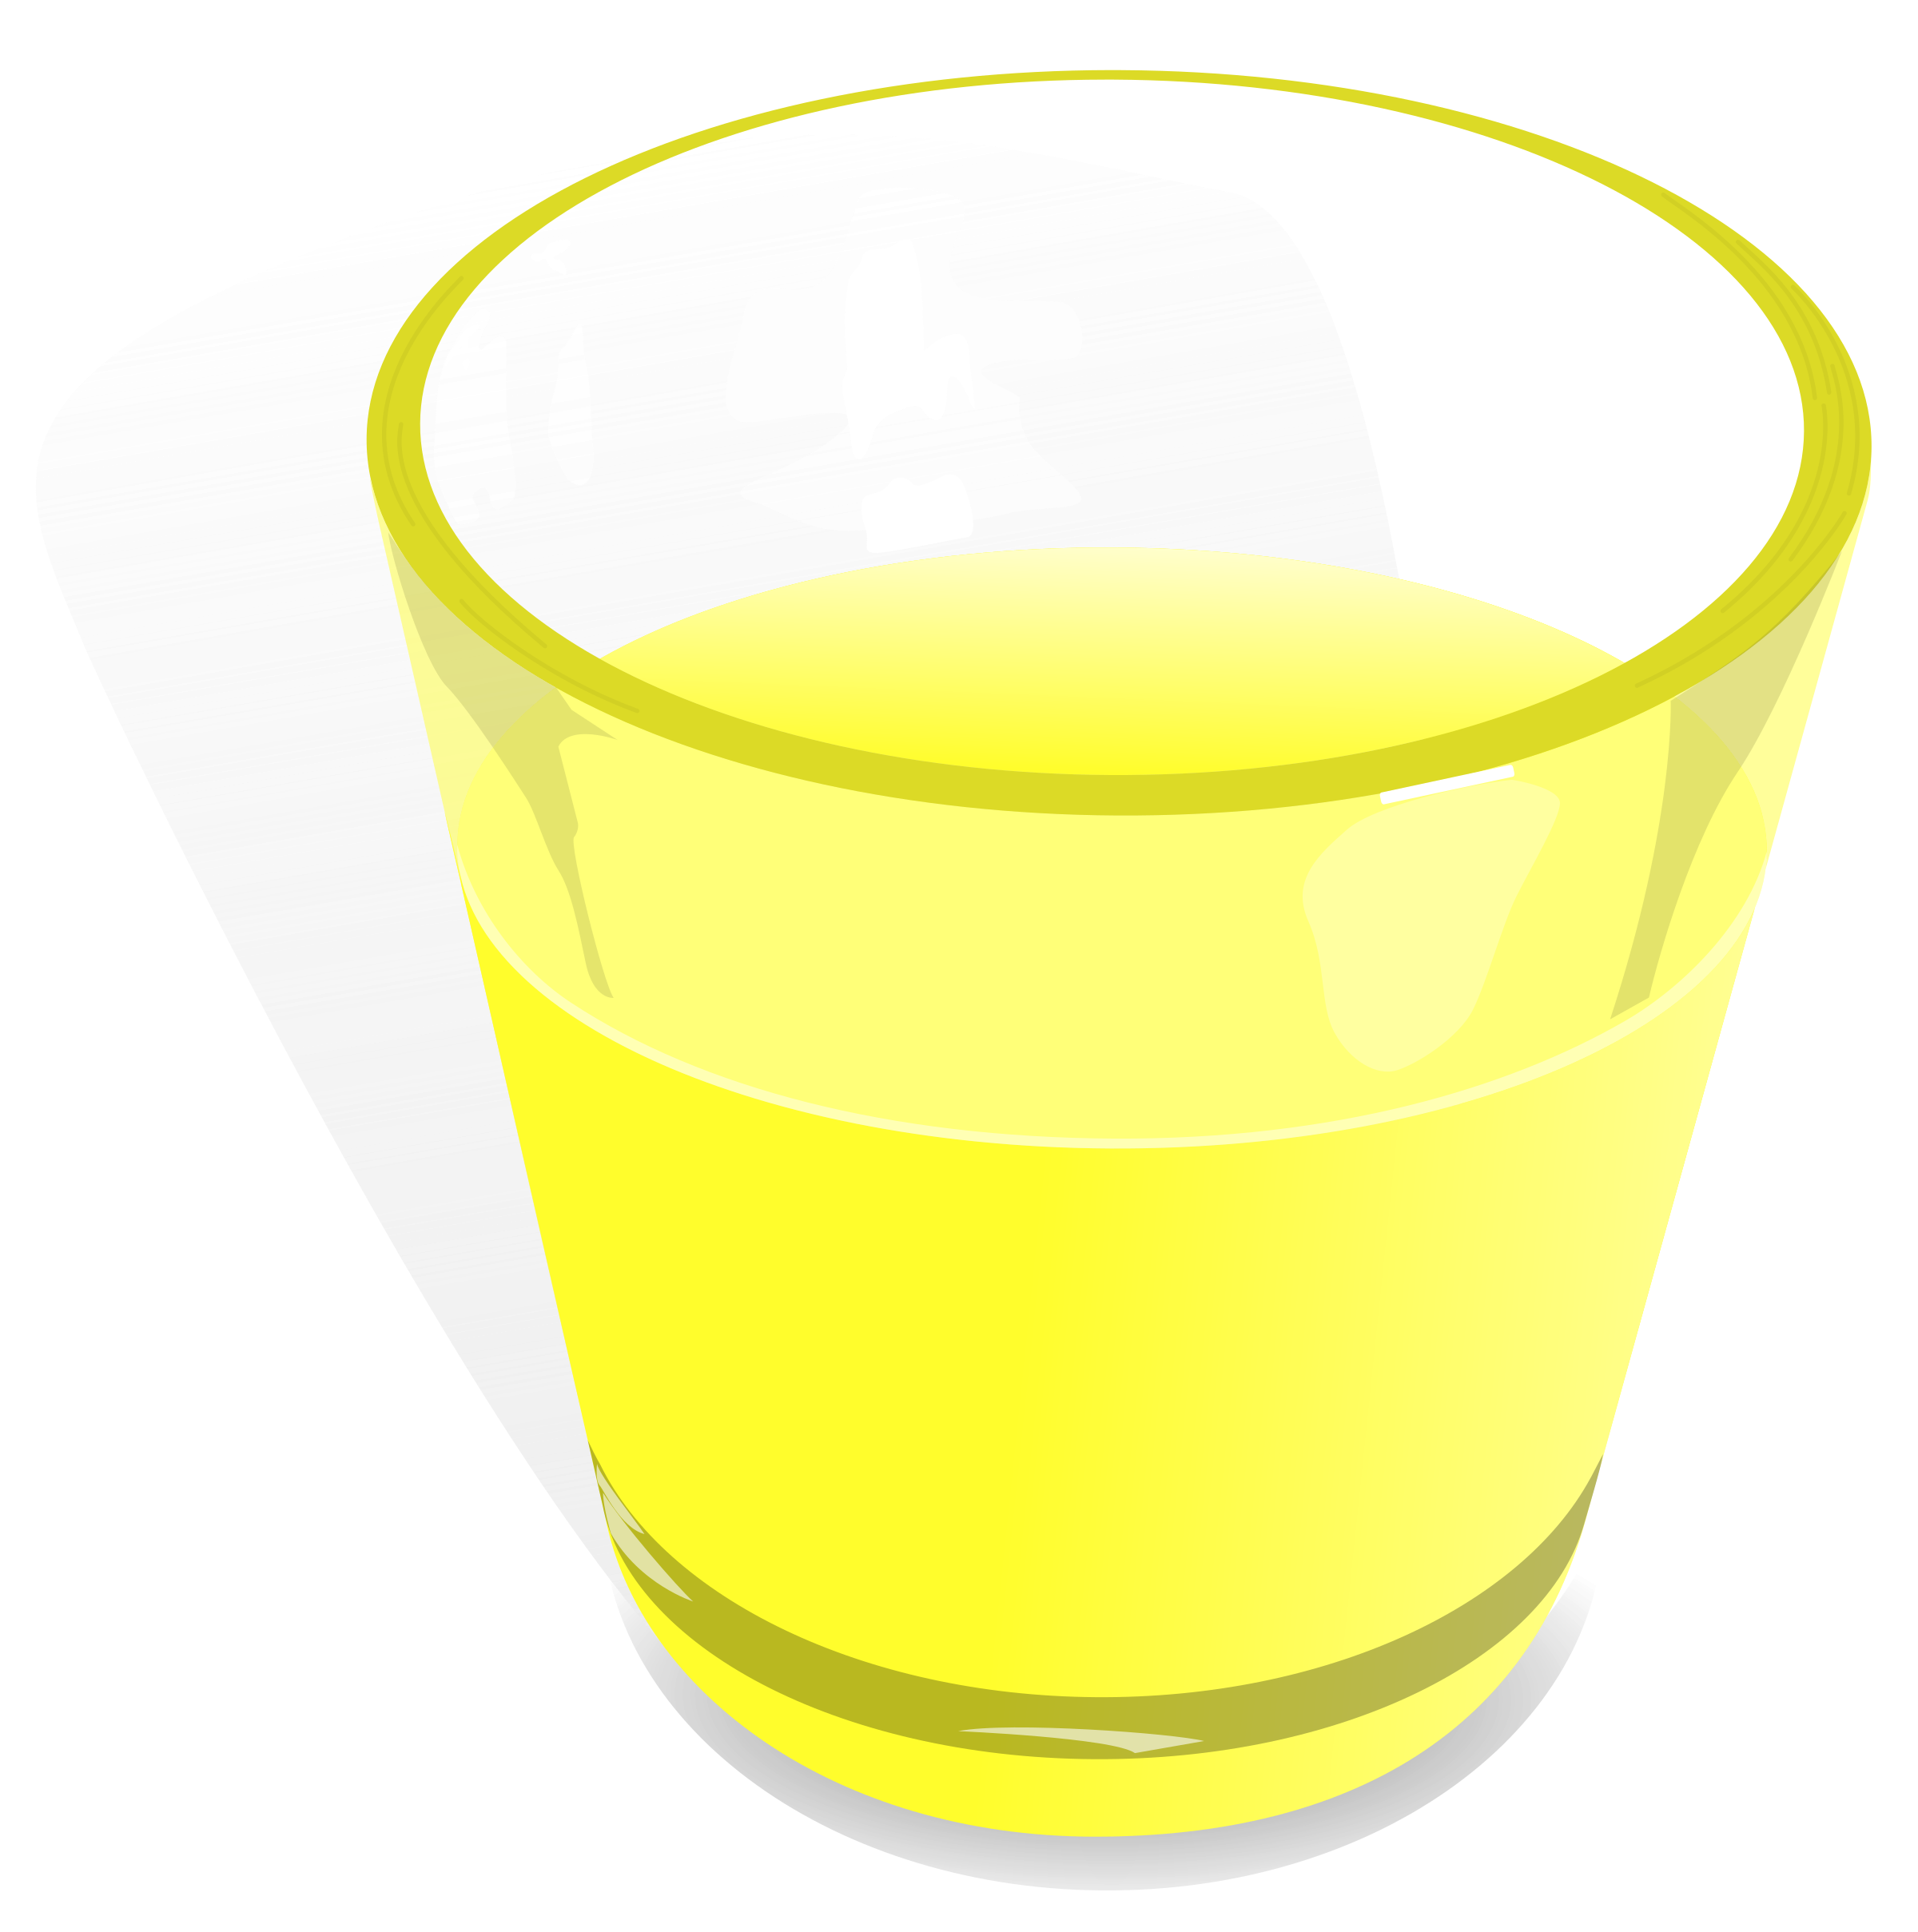 cup clipart drinking glass